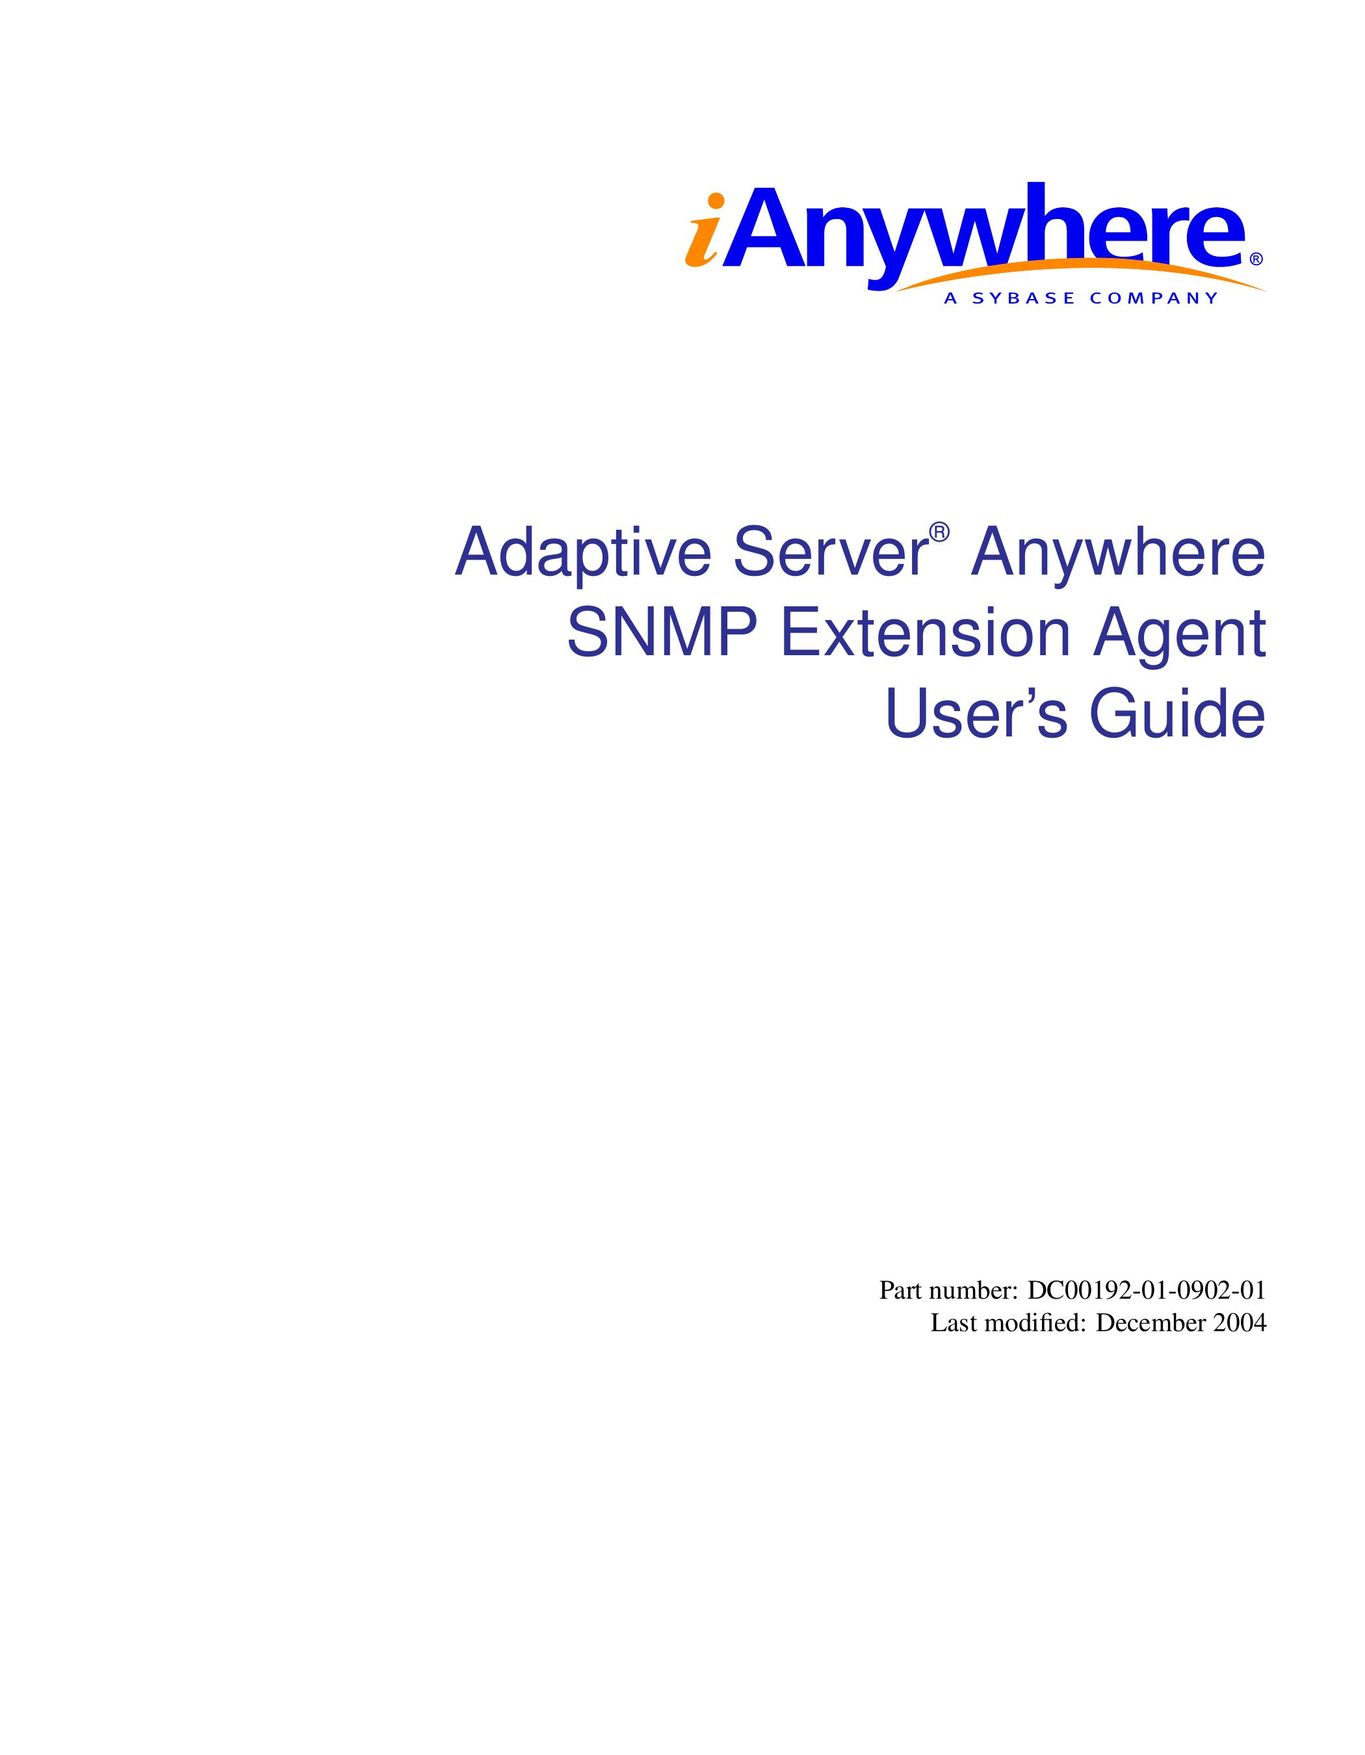 Sybase Adaptive Server Anywhere SNMP Extension Agent Network Card User Manual